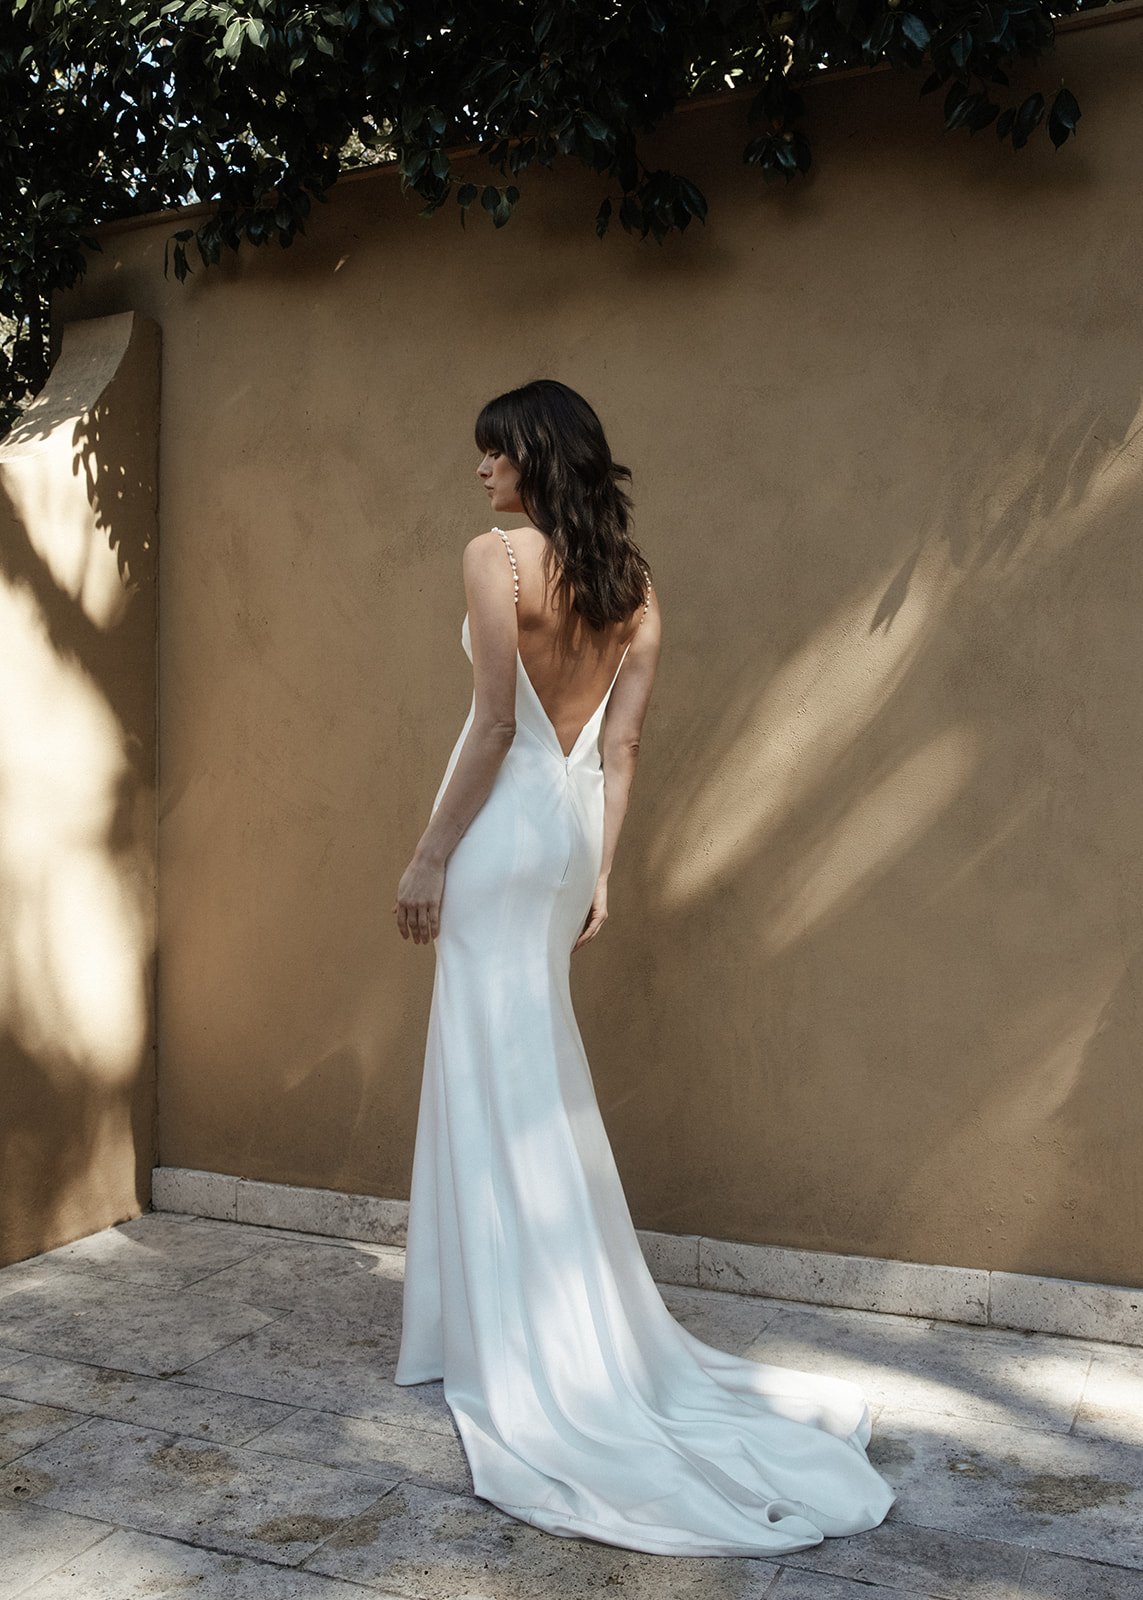 Silky Satin Low Back and Pearl Straps wedding gown made by Moira Hughes Couture in Sydney.jpg